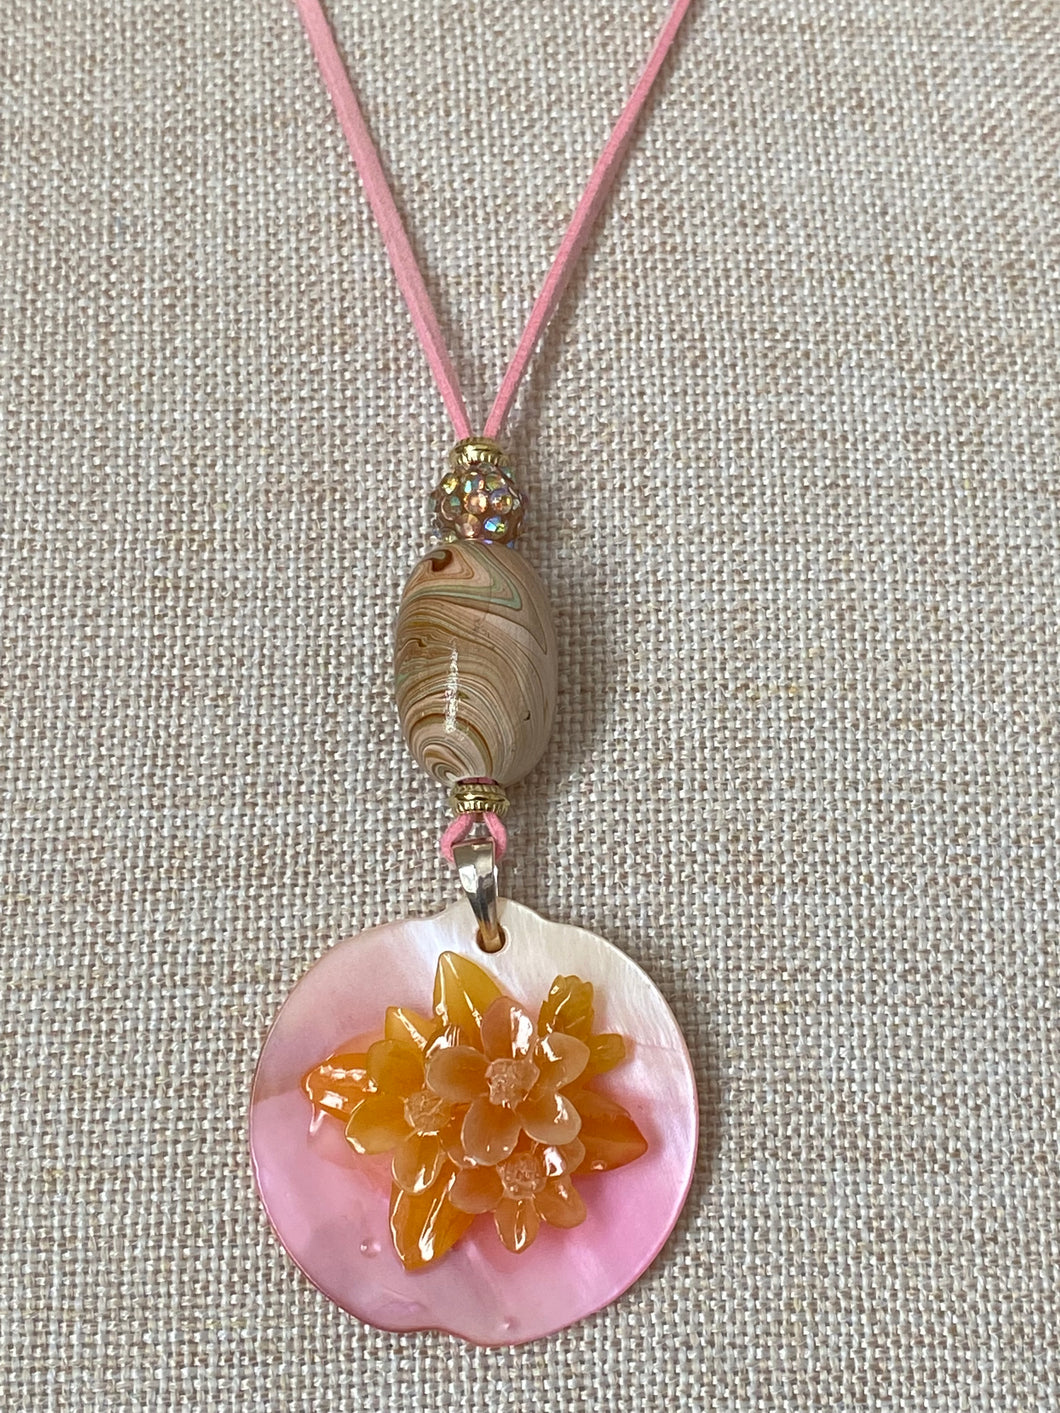 3D Pendant and Suede Necklace